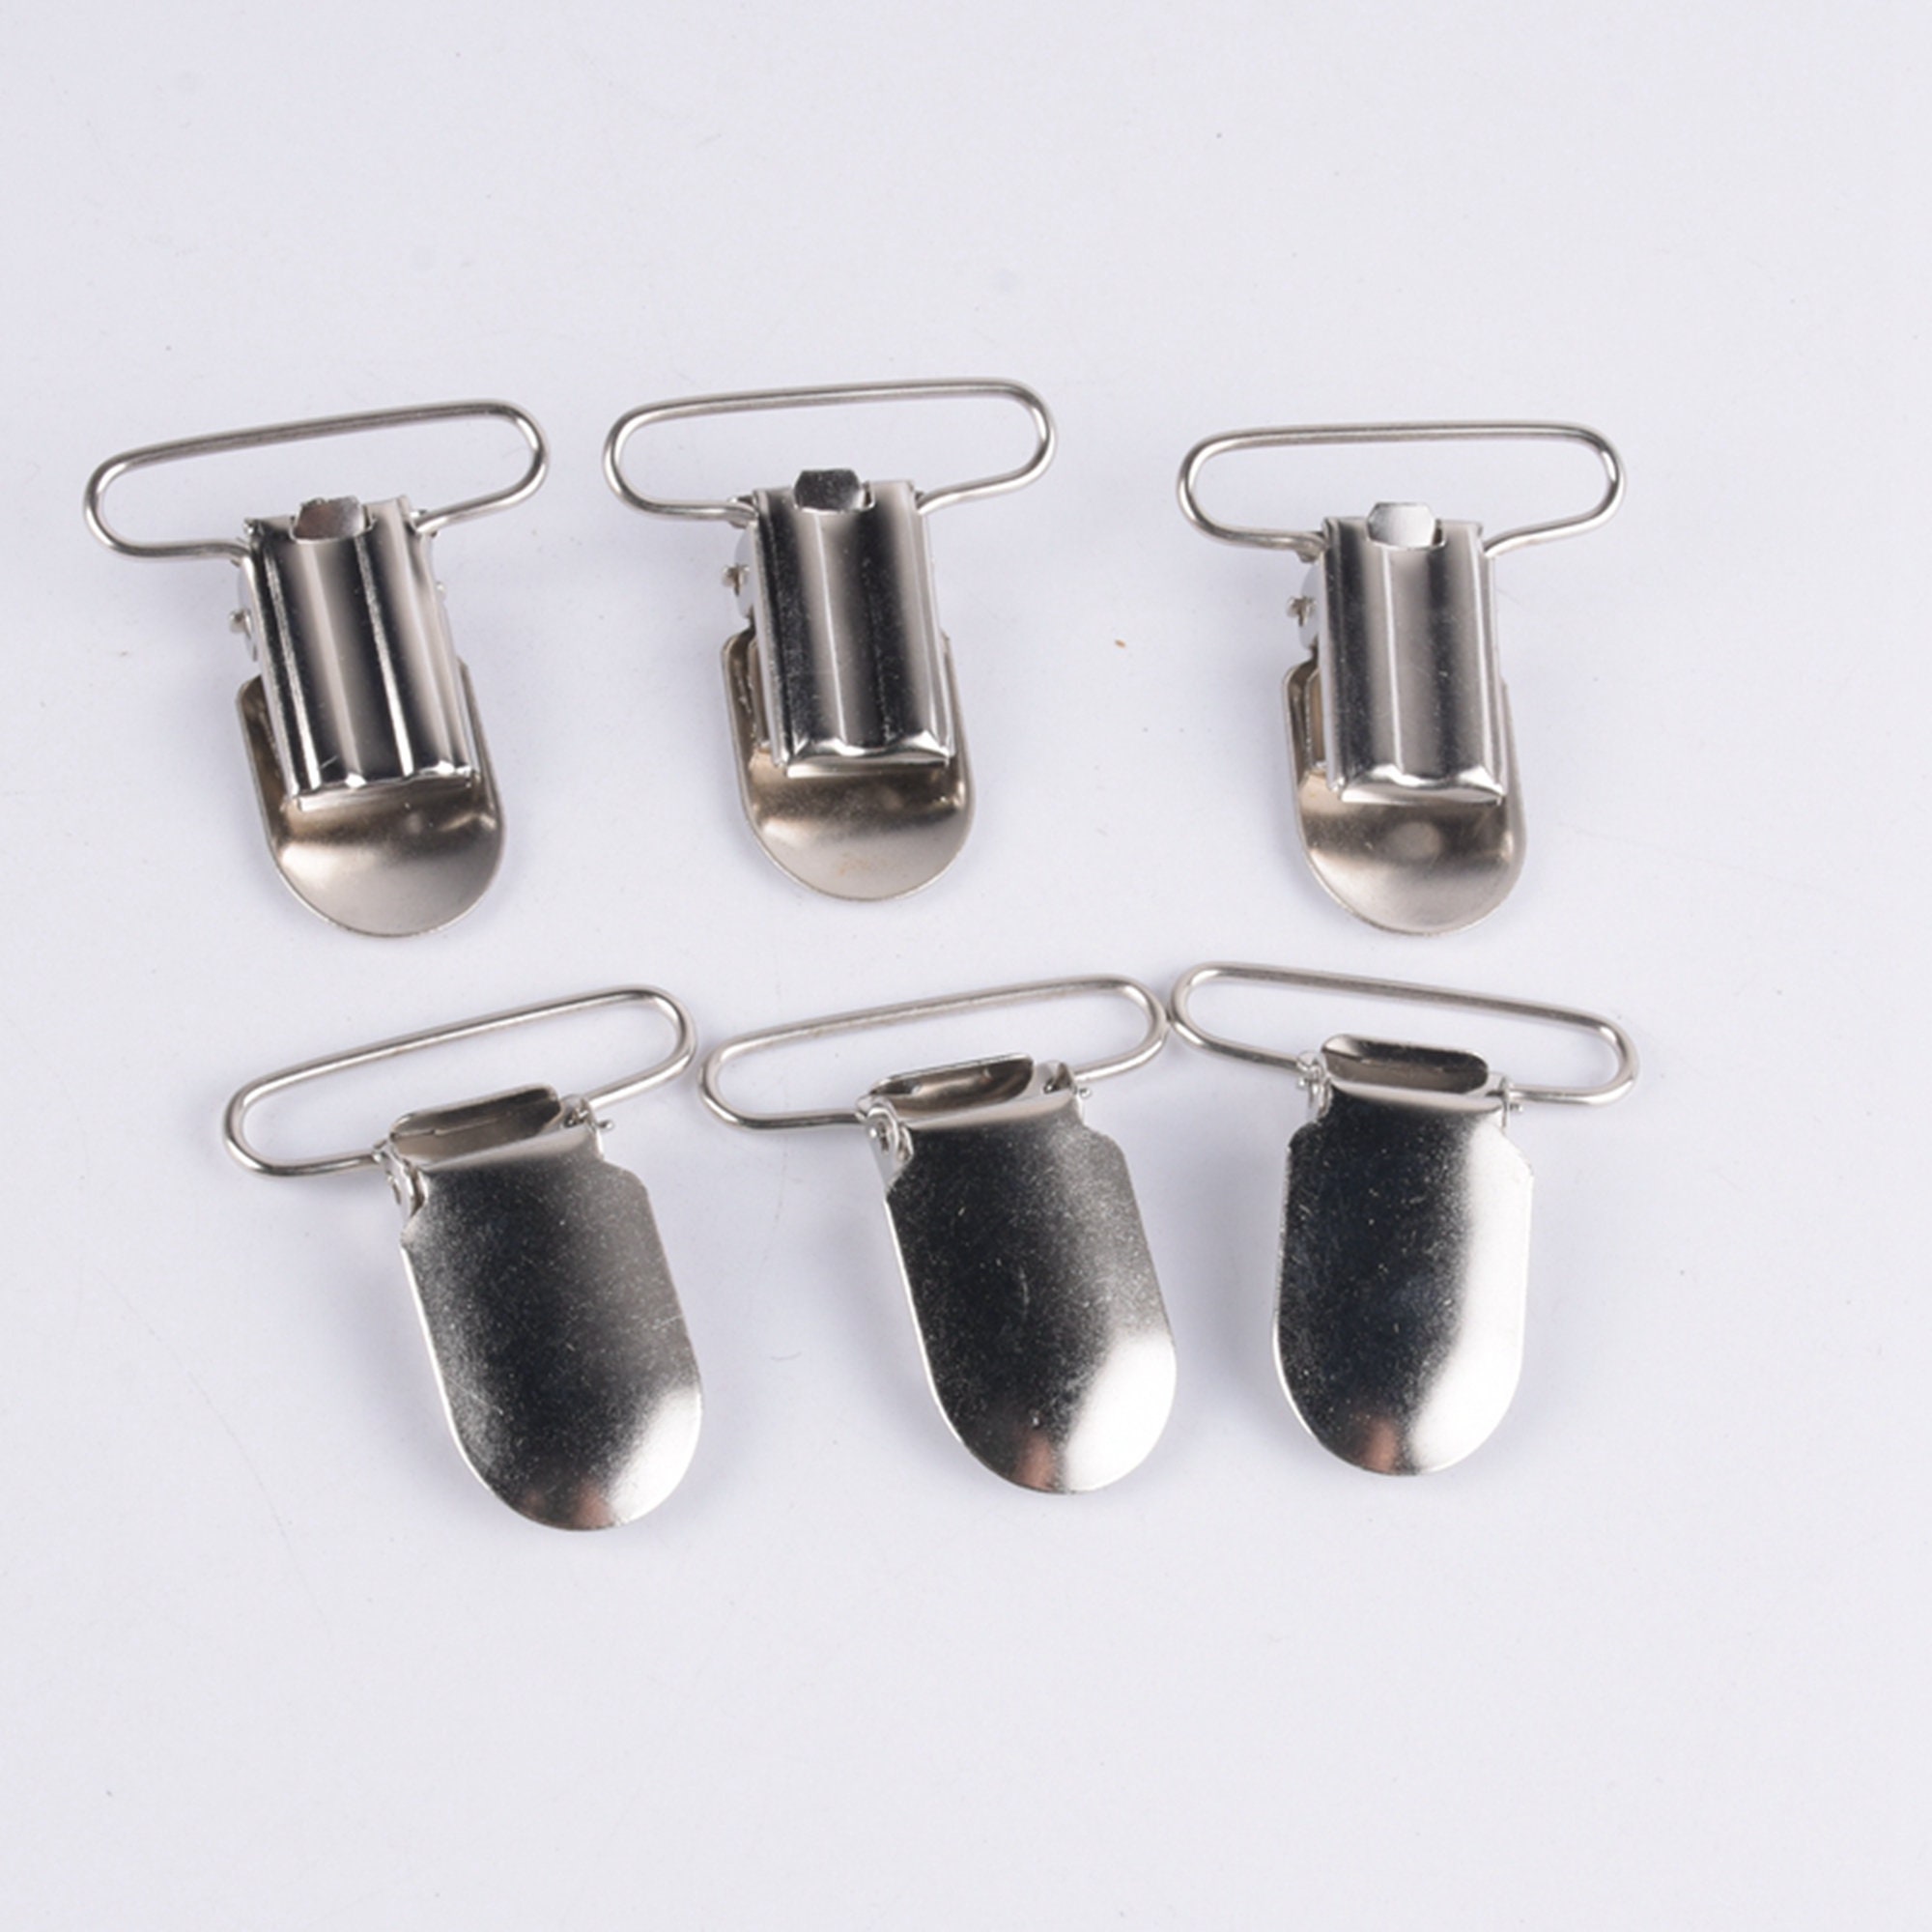 3/4 Sew-On Metal Suspender Clips Without Plastic PVC Teeth: Nickel Color 